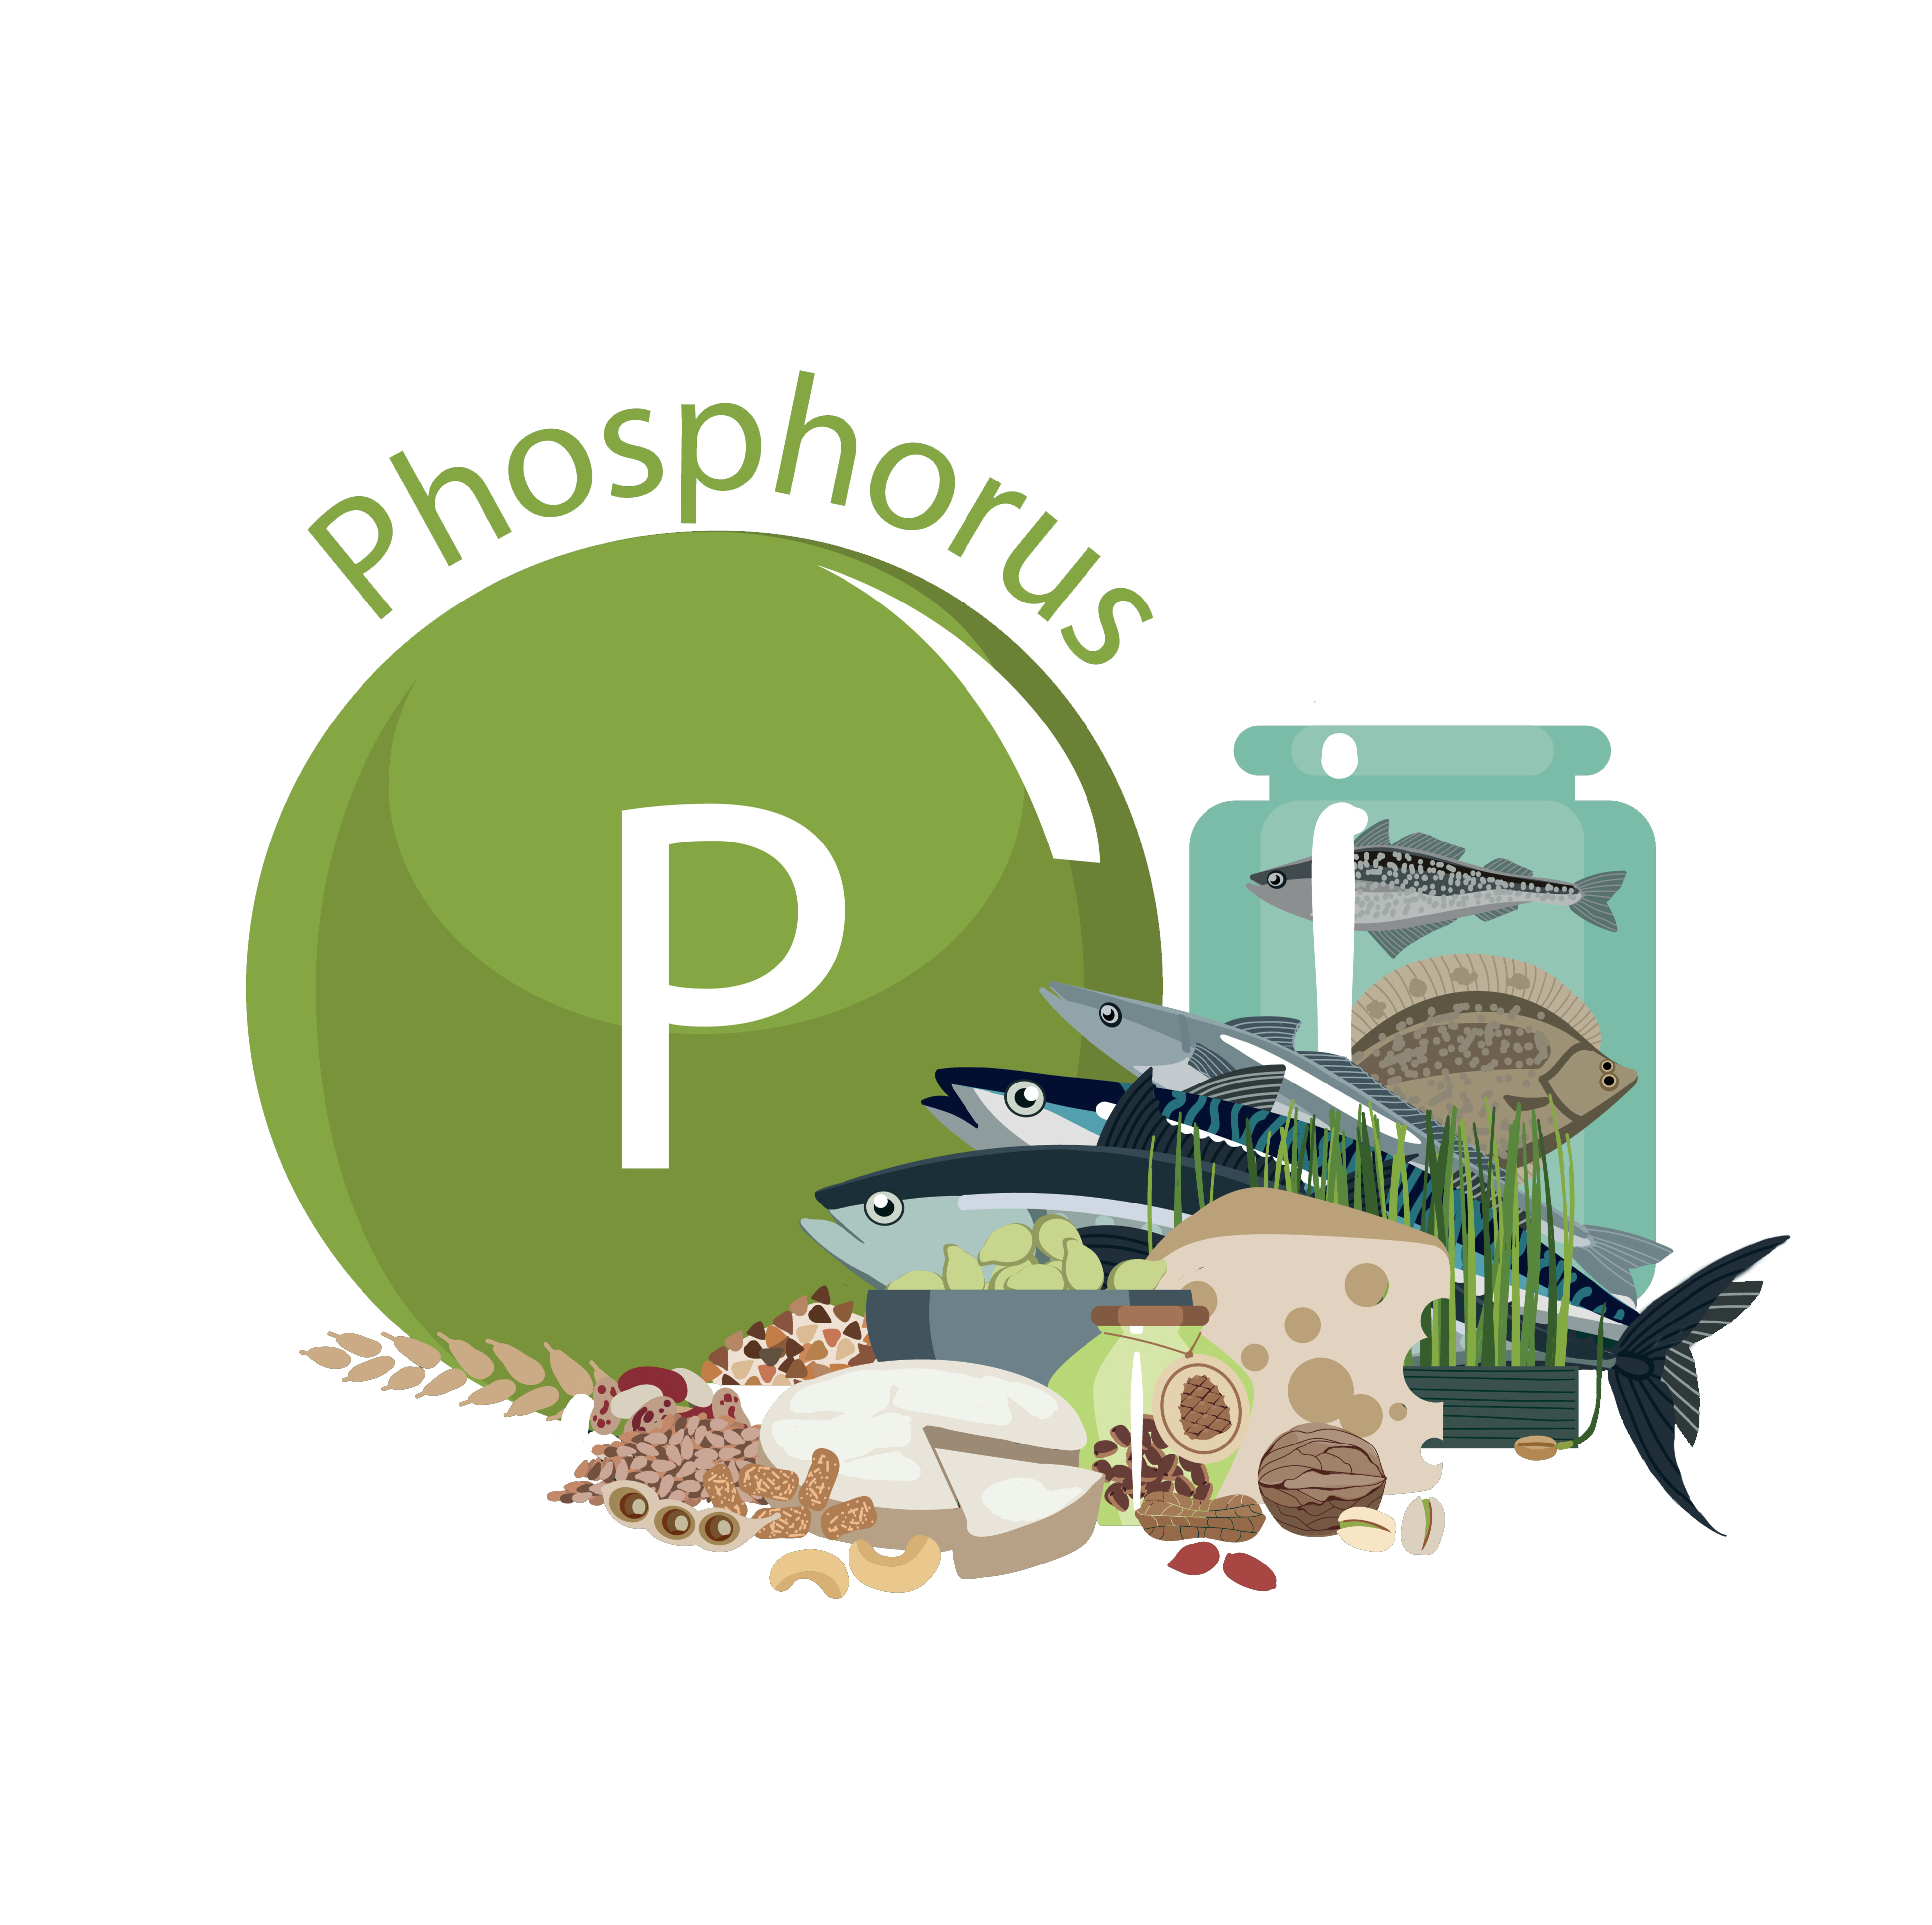 How much phosphorus should I have?